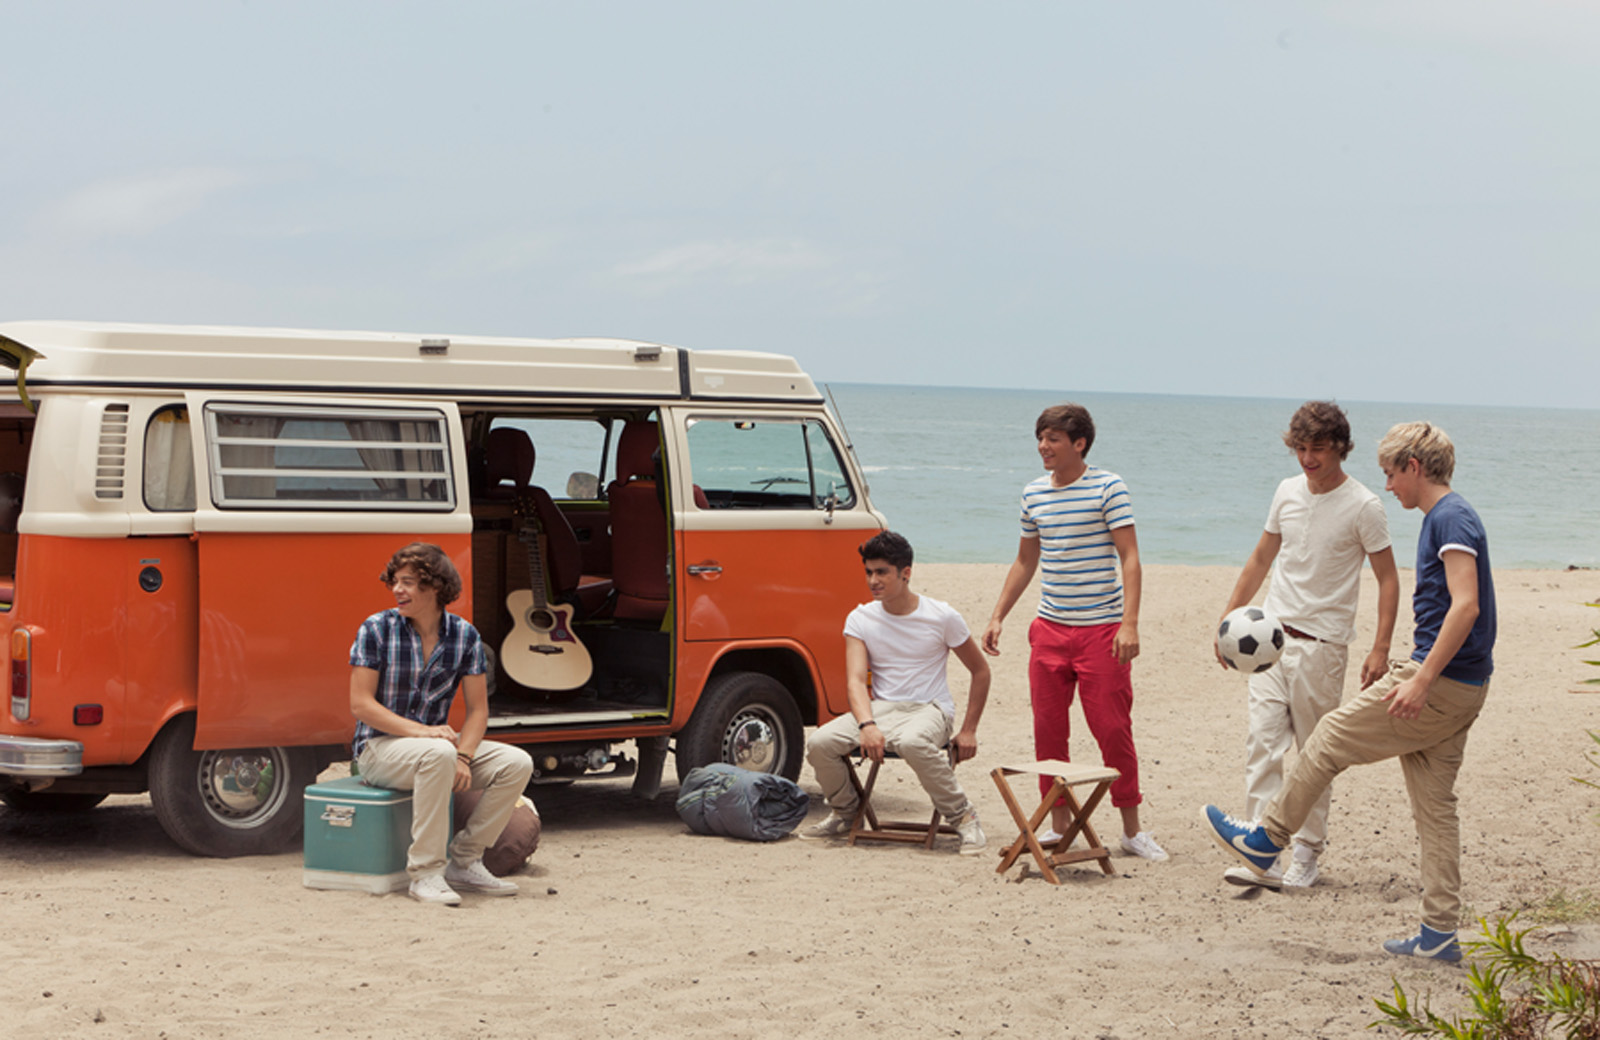 Niall Horan in Music Video: What Makes You Beautiful